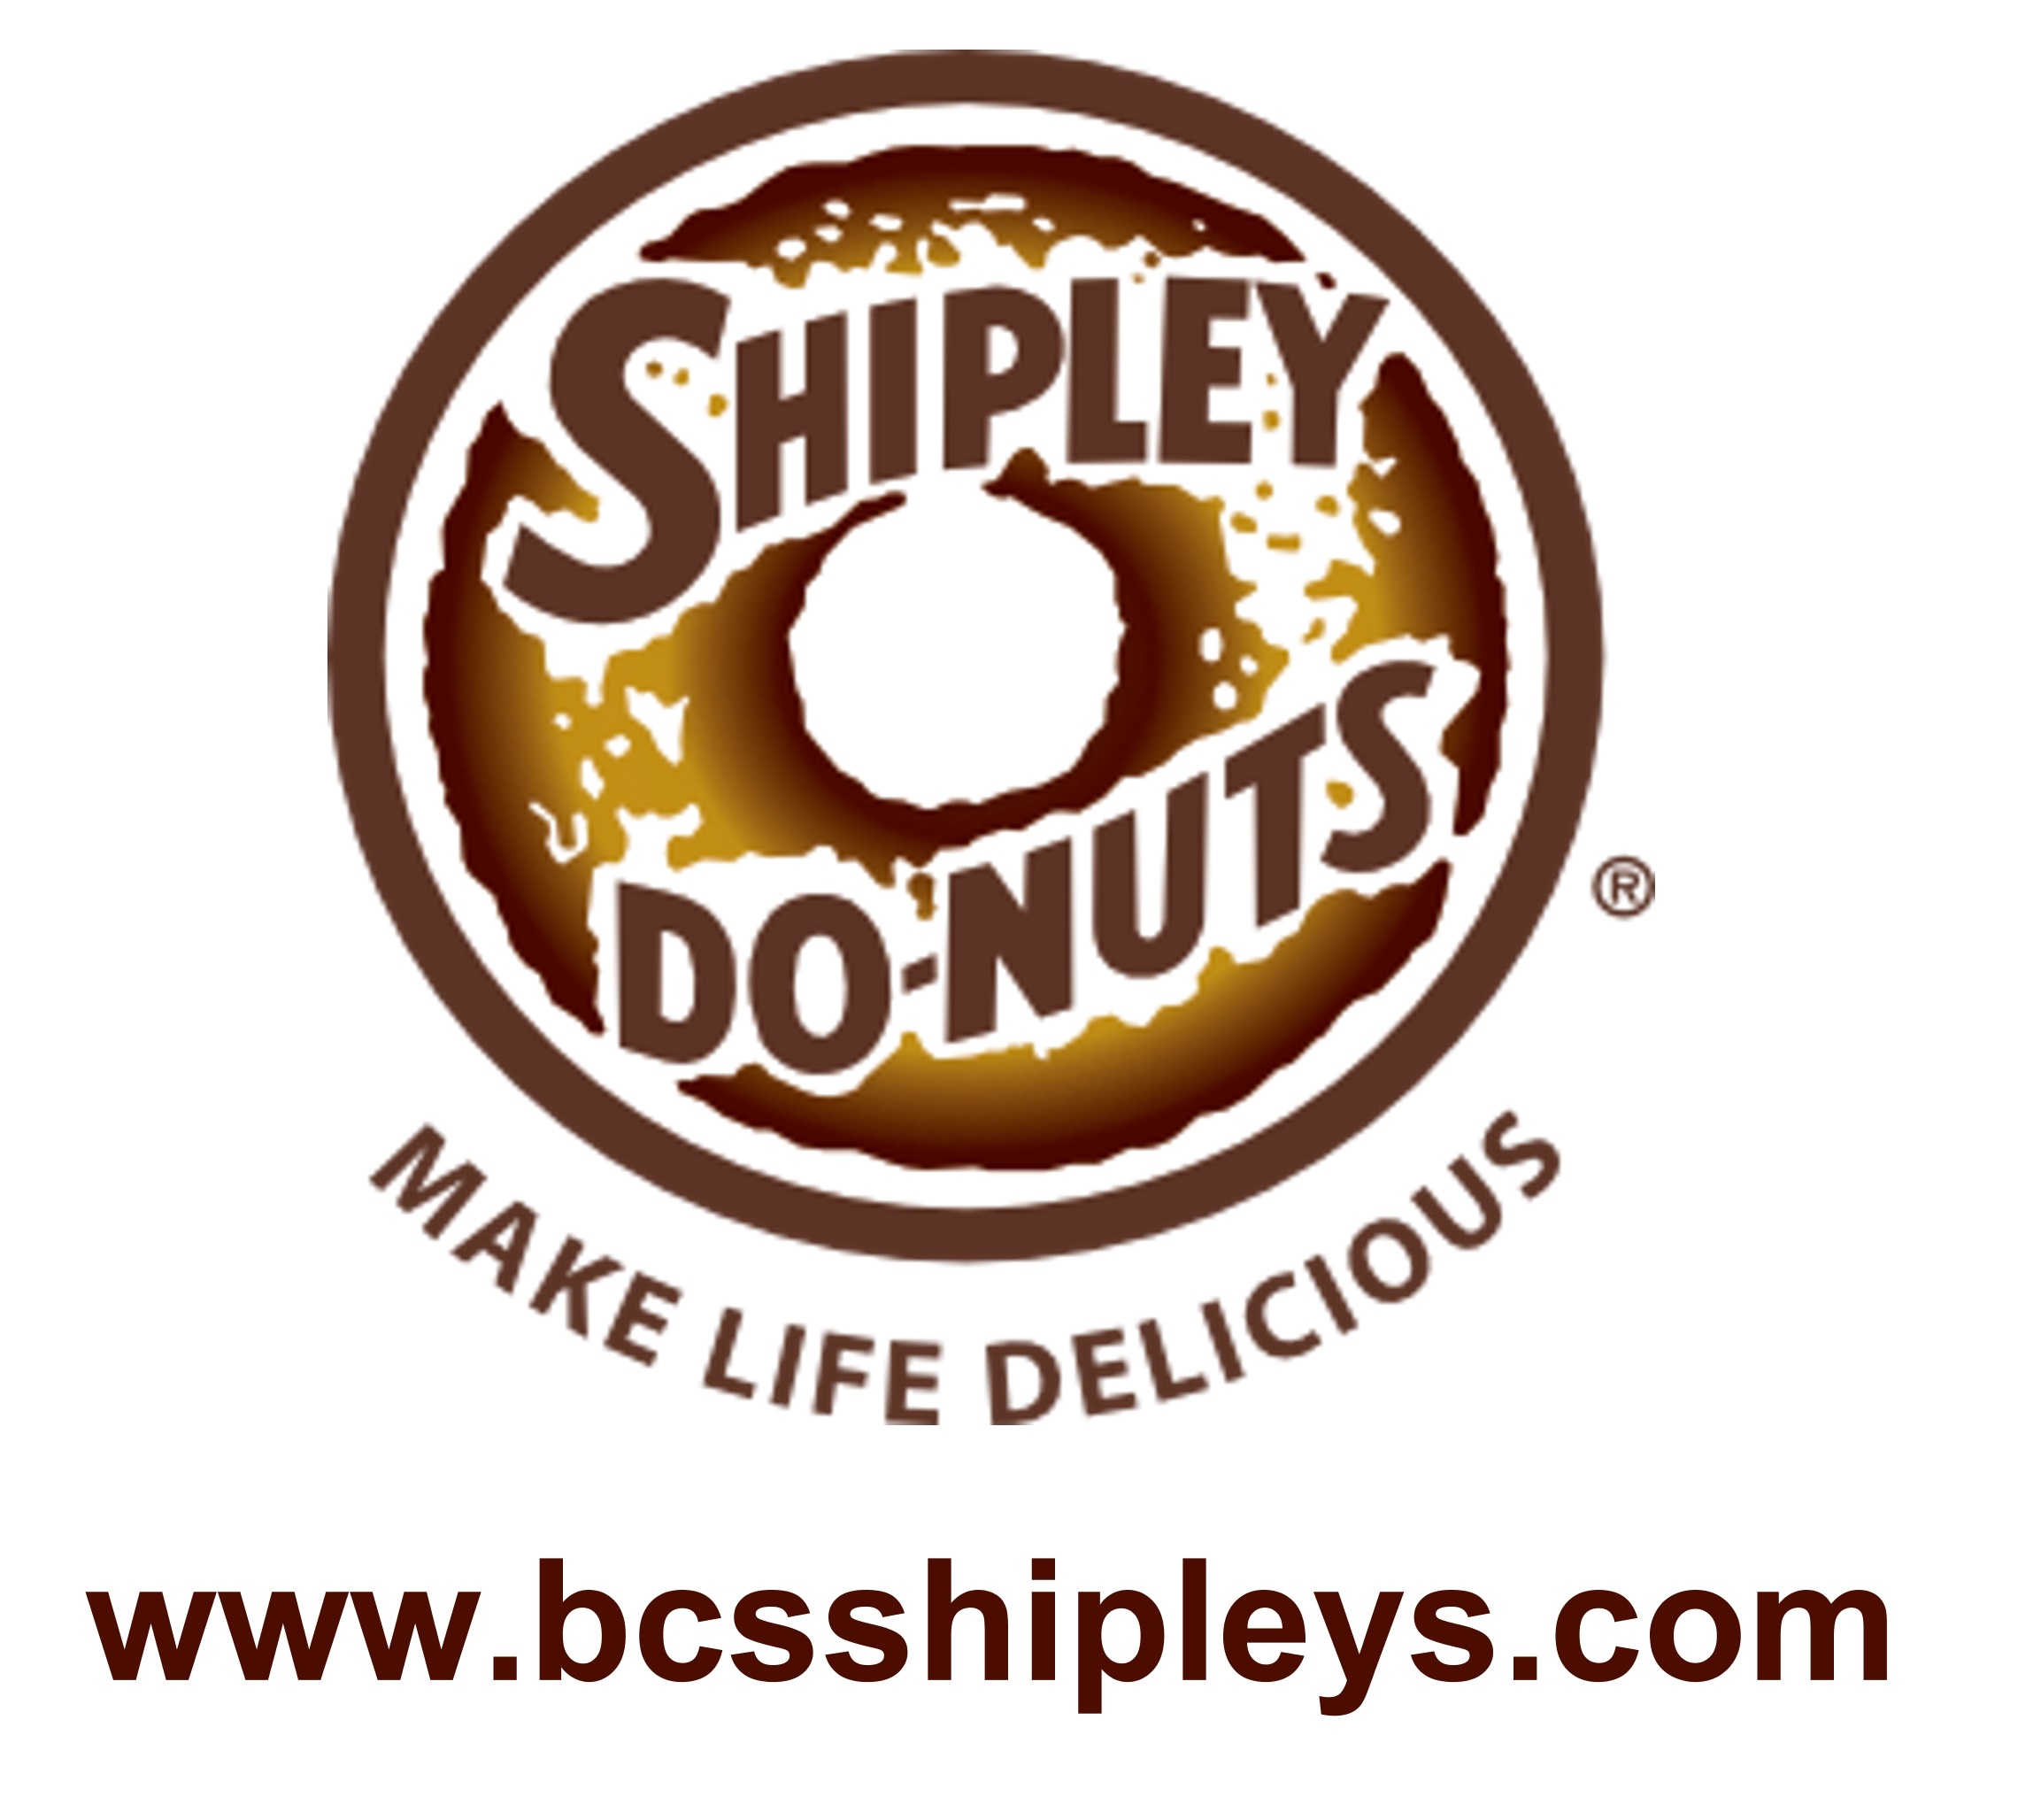 D. (Event Day) Shipley Donuts